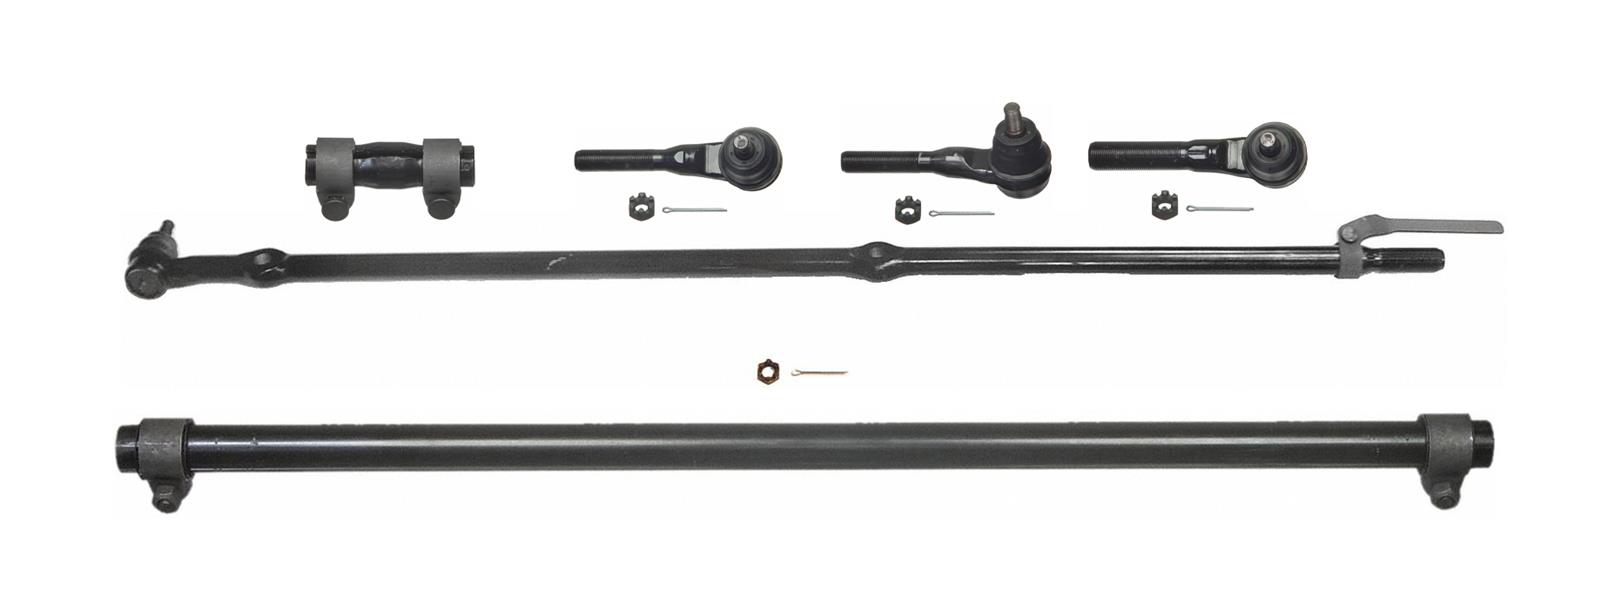 Moog Chassis Parts SUM-CSUMSRJ005 Jeep YJ Wrangler Chassis Tie Rod End  Combos Summit Racing